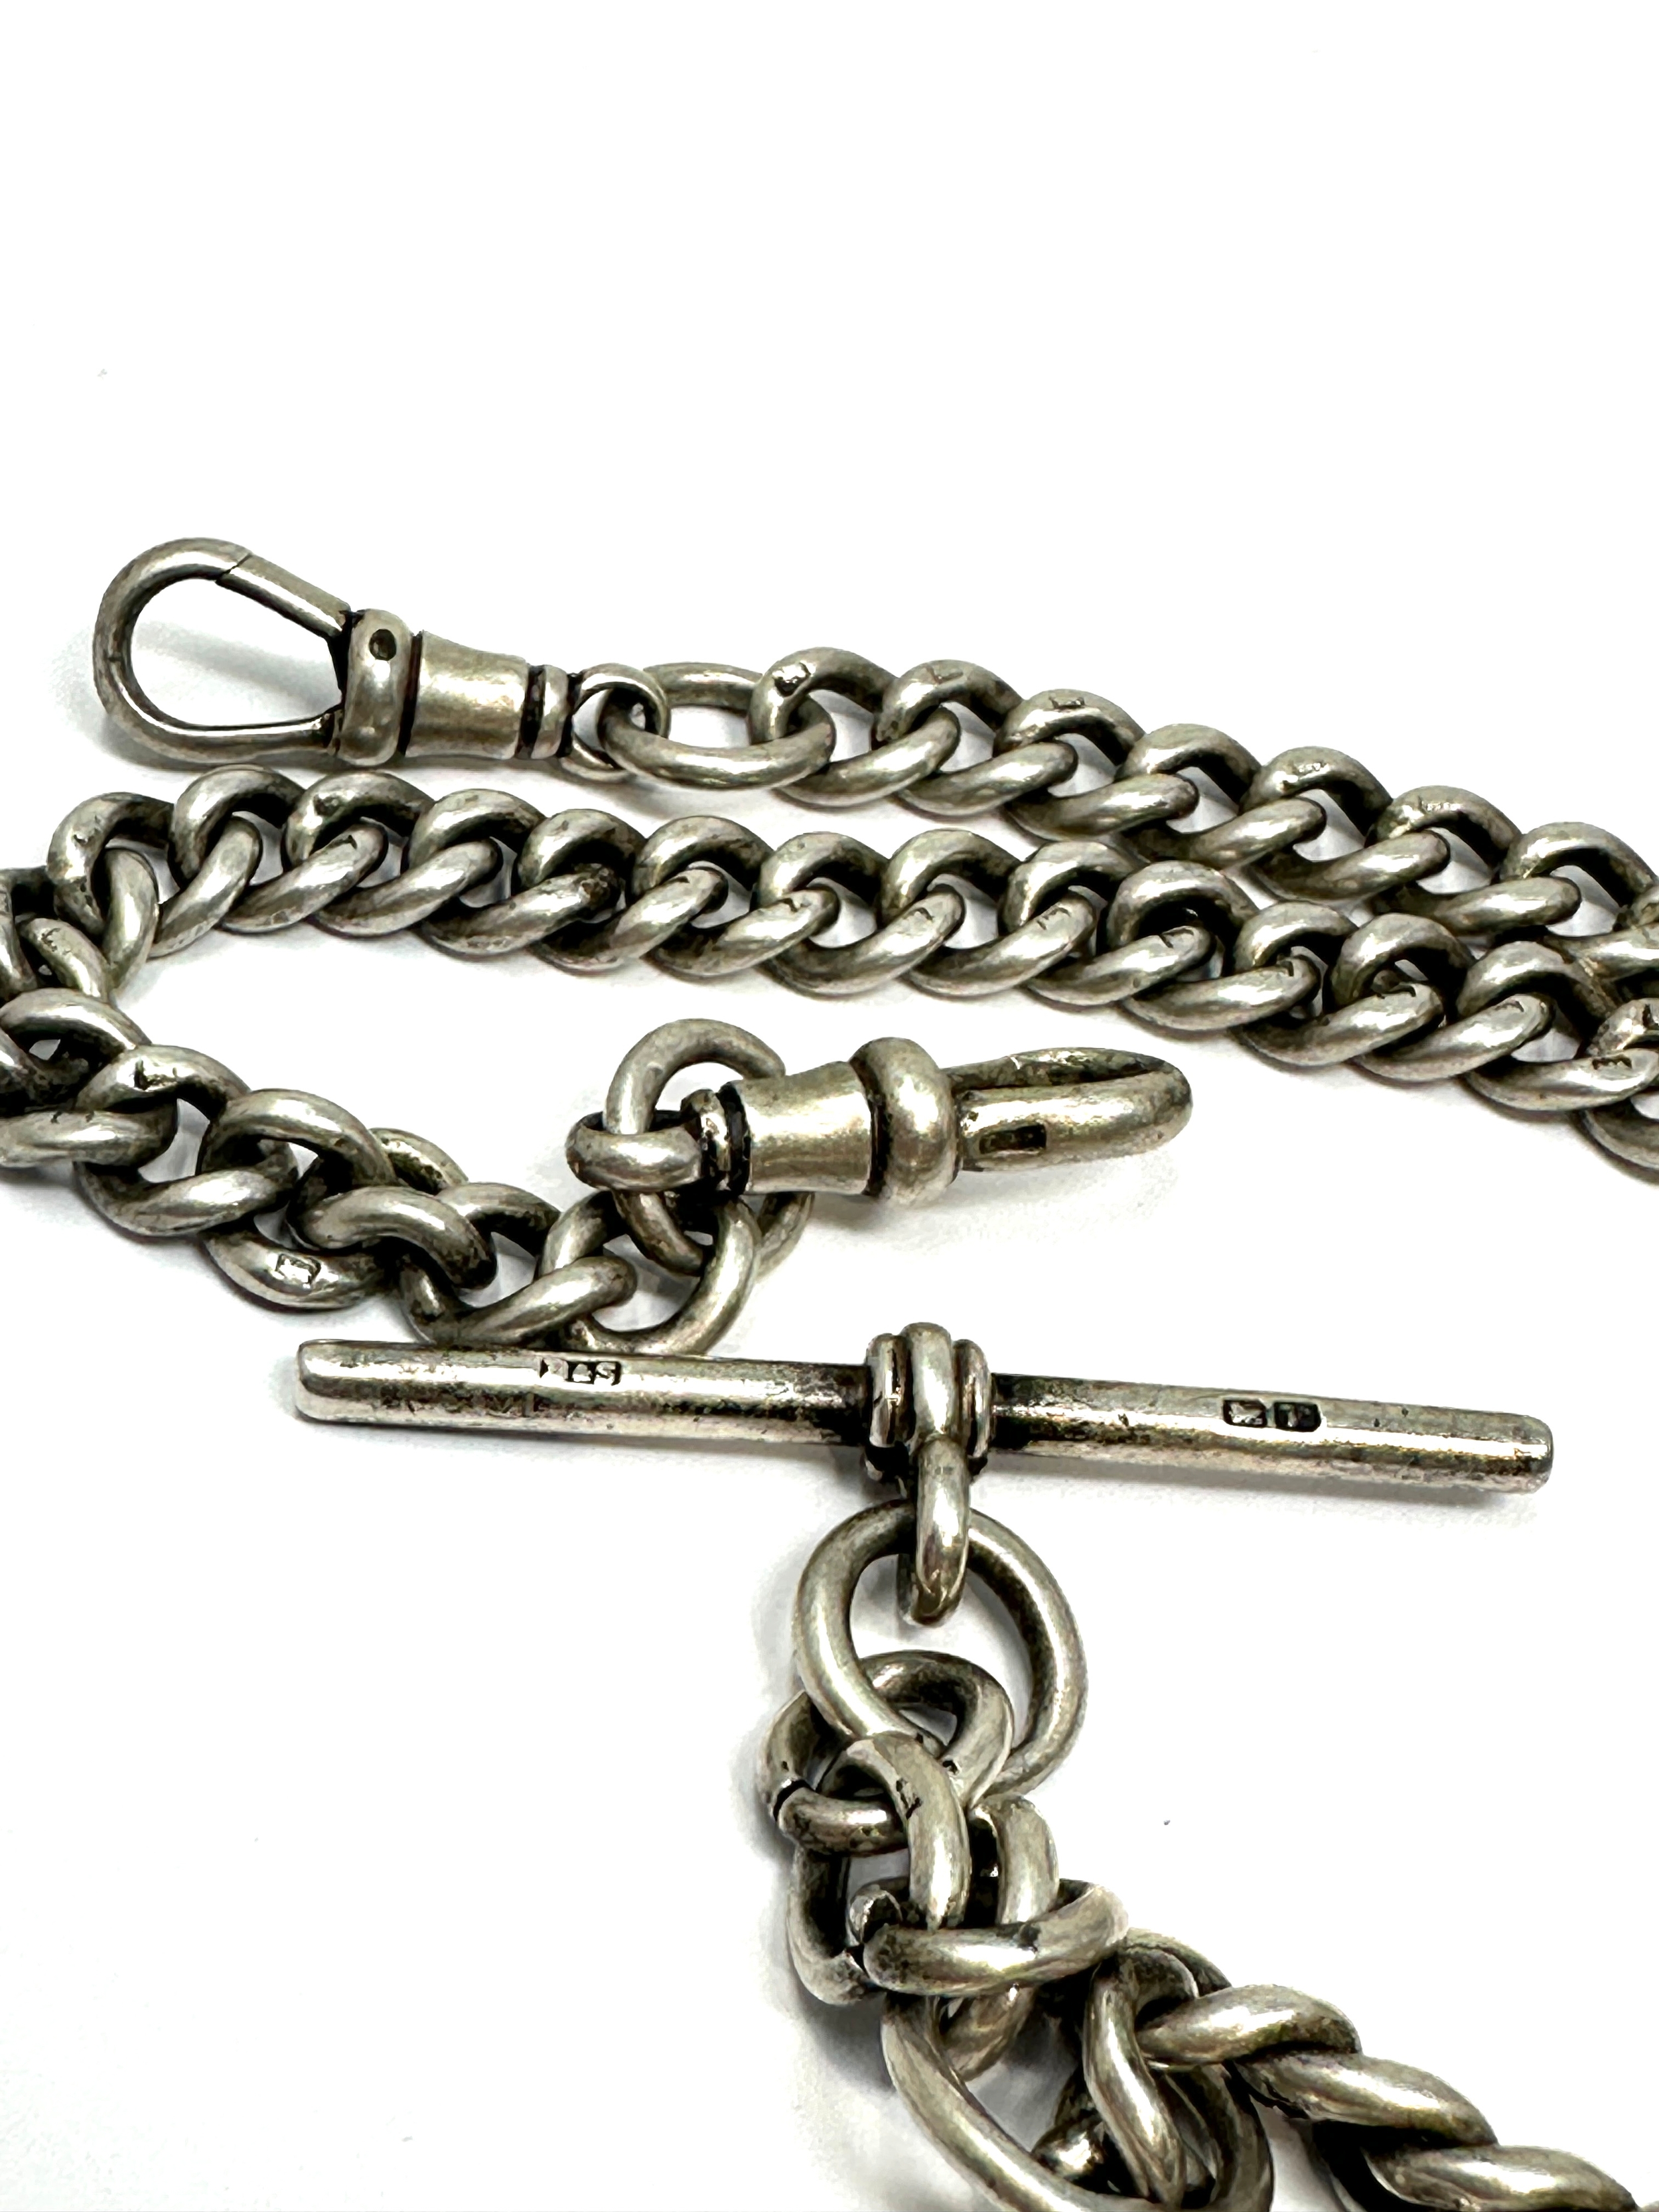 Antique silver double albert watch chain weight approx 48g - Image 3 of 3